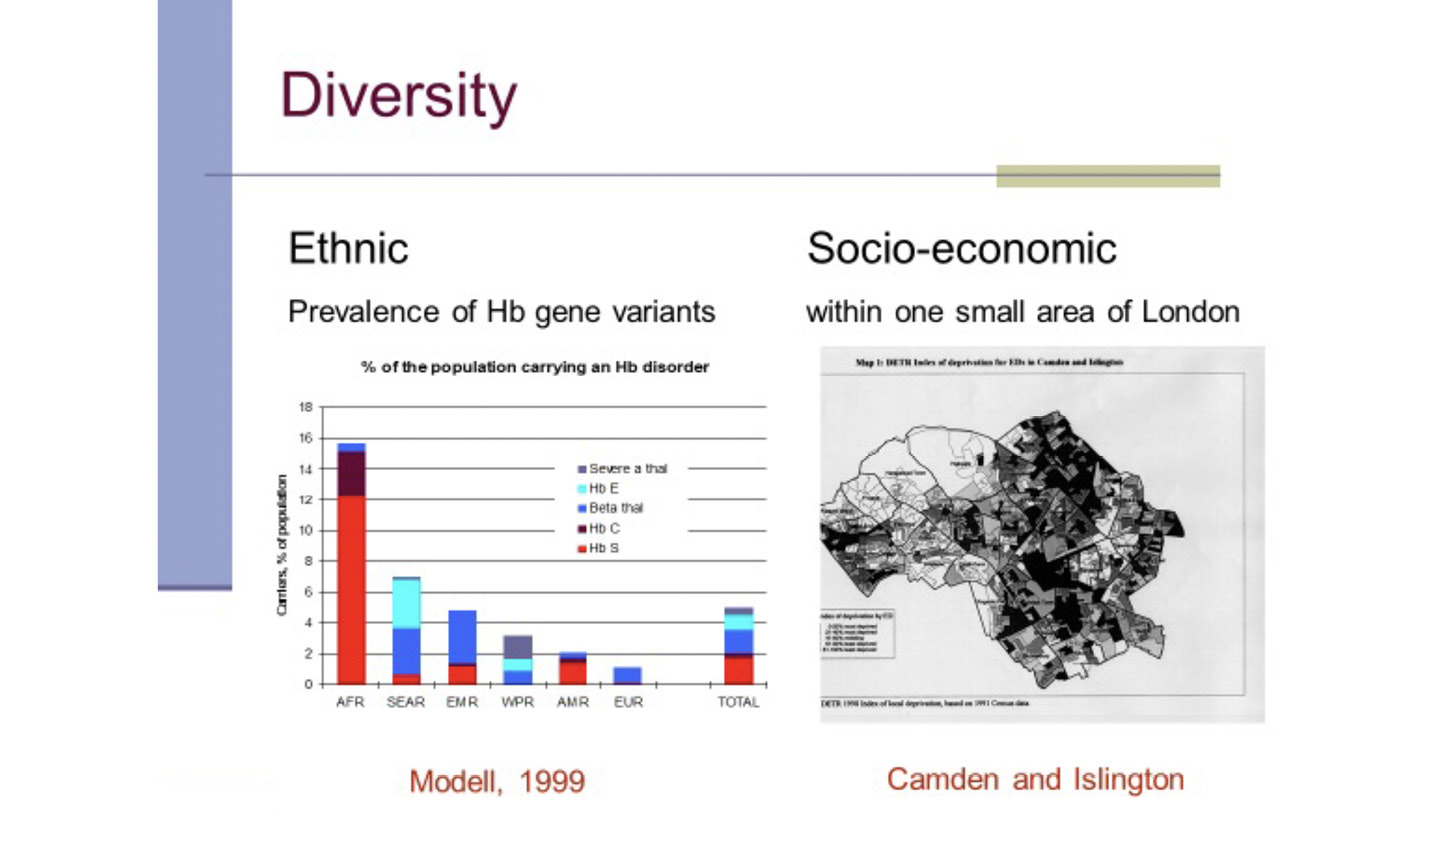 A presentation slide on diversity. Ethnic: Prevalence of Hb gene variants - demonstrated by a graph entitled “% of the population carrying a Hb disorder”, which compares “Carriers, % of population” and the location (Modell, 1999). Socio-economic: within one small area of London - illustrated by a colour-coded map of Camden and Islington (of London).